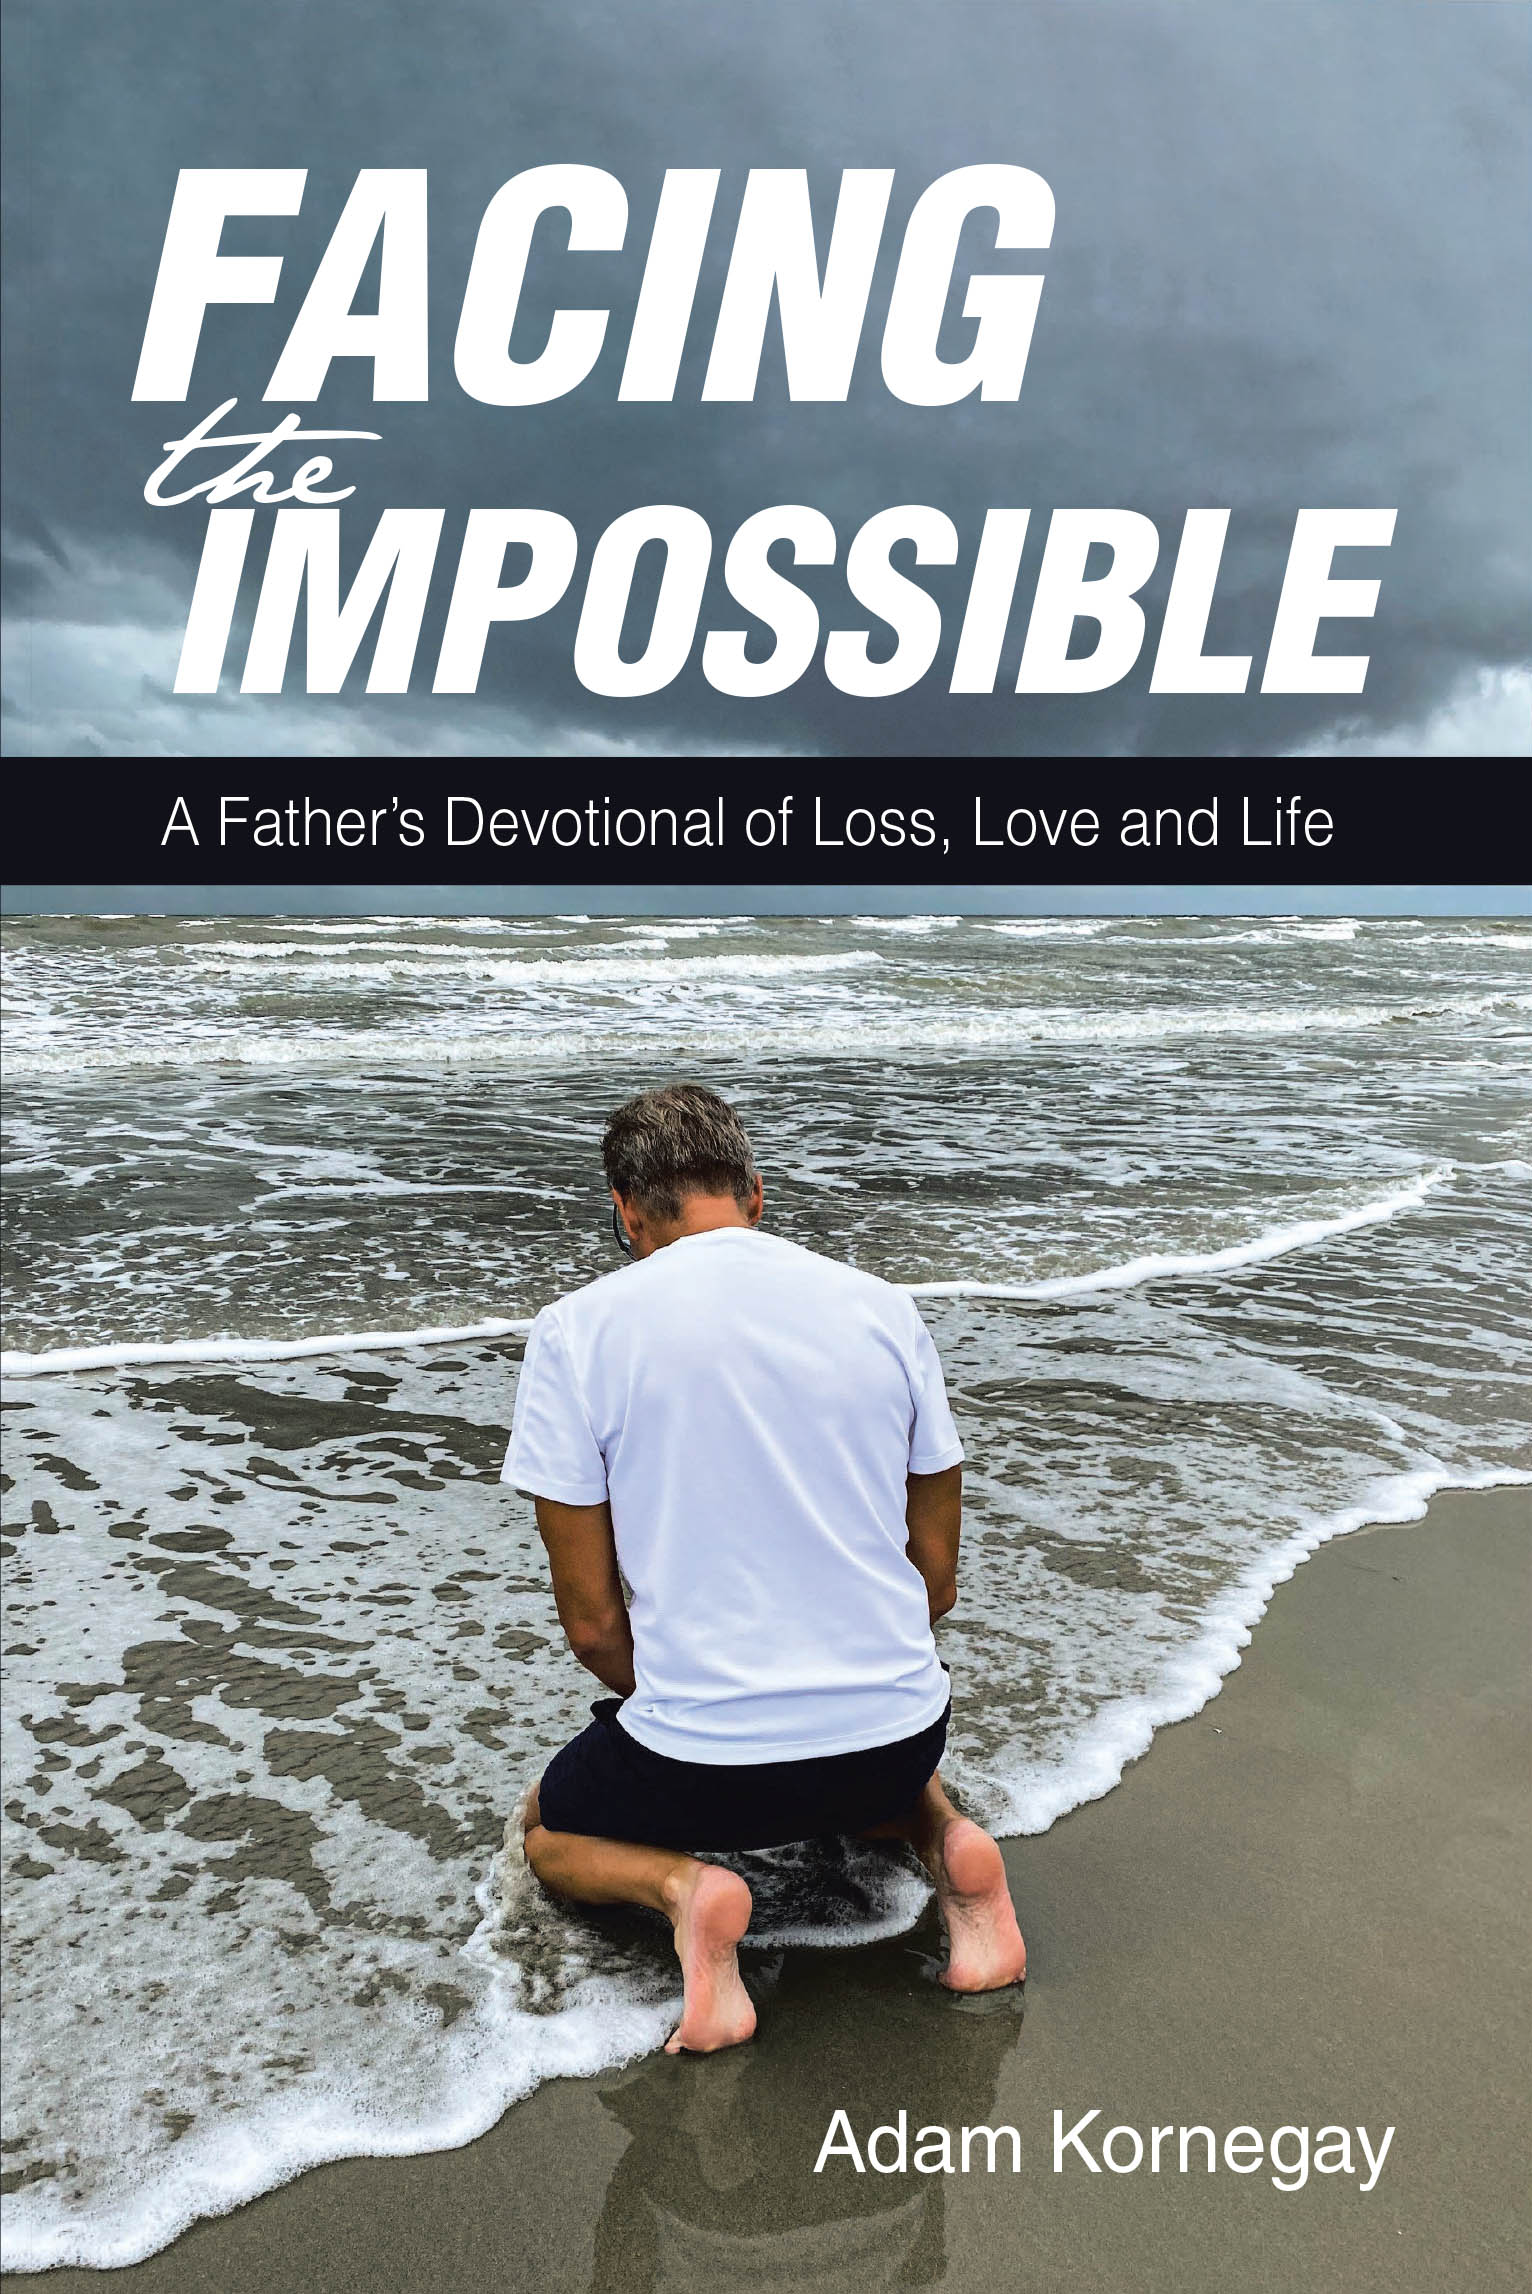 Adam Kornegay’s Newly Released “Facing the Impossible: A Father’s Devotional of Loss, Love and Life” is a Heartfelt and Inspirational Journey